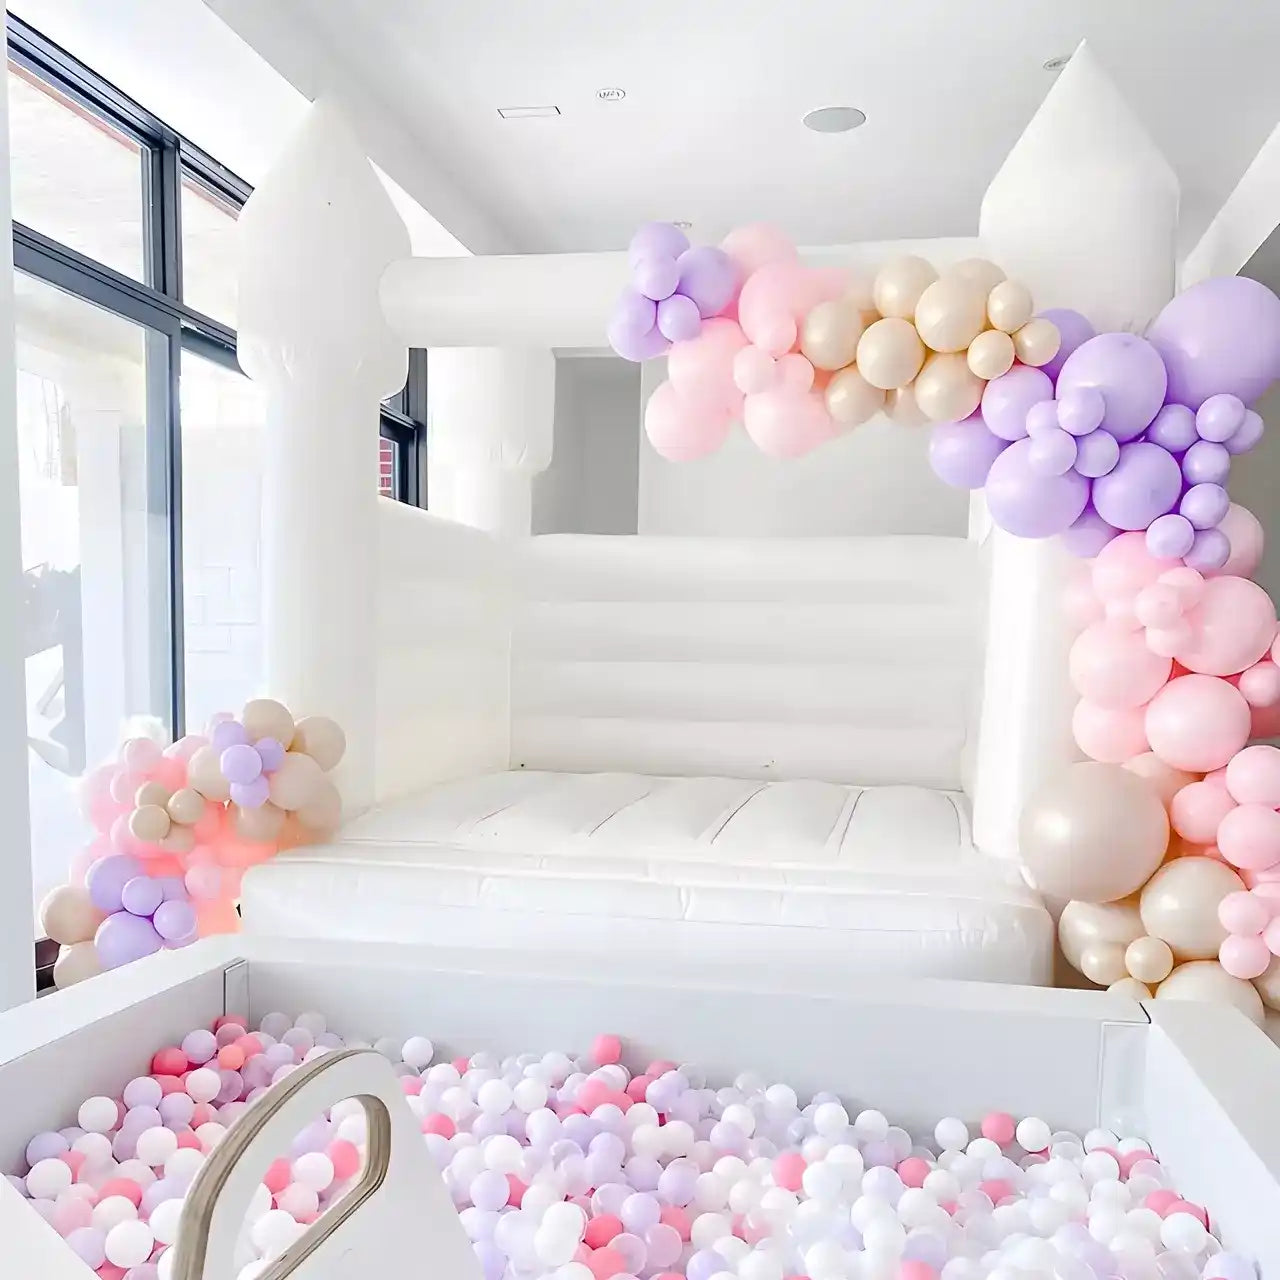 10ft x 10ft white bounce house with ball pits and balloons in soft play business